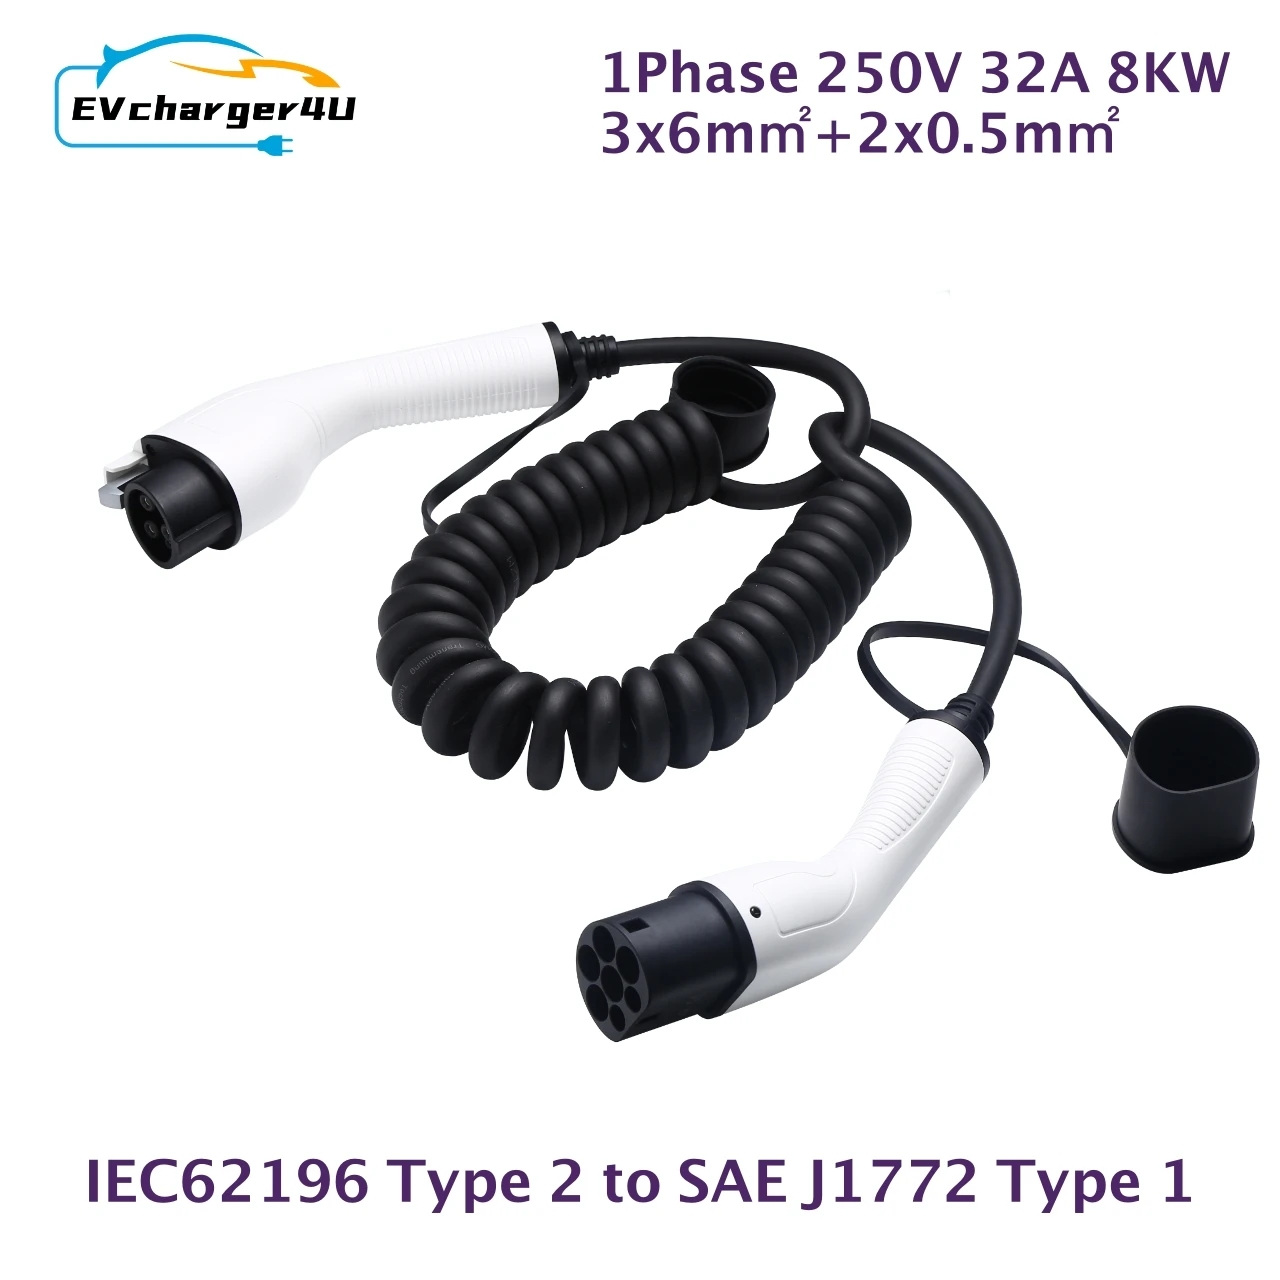 

EVcharger4U 1Phase 110-250V 32A 8KW Type 2 to J1772 Type1 EV Charging Cable Spiral Extension Coiled Cables for Electric Vehicle